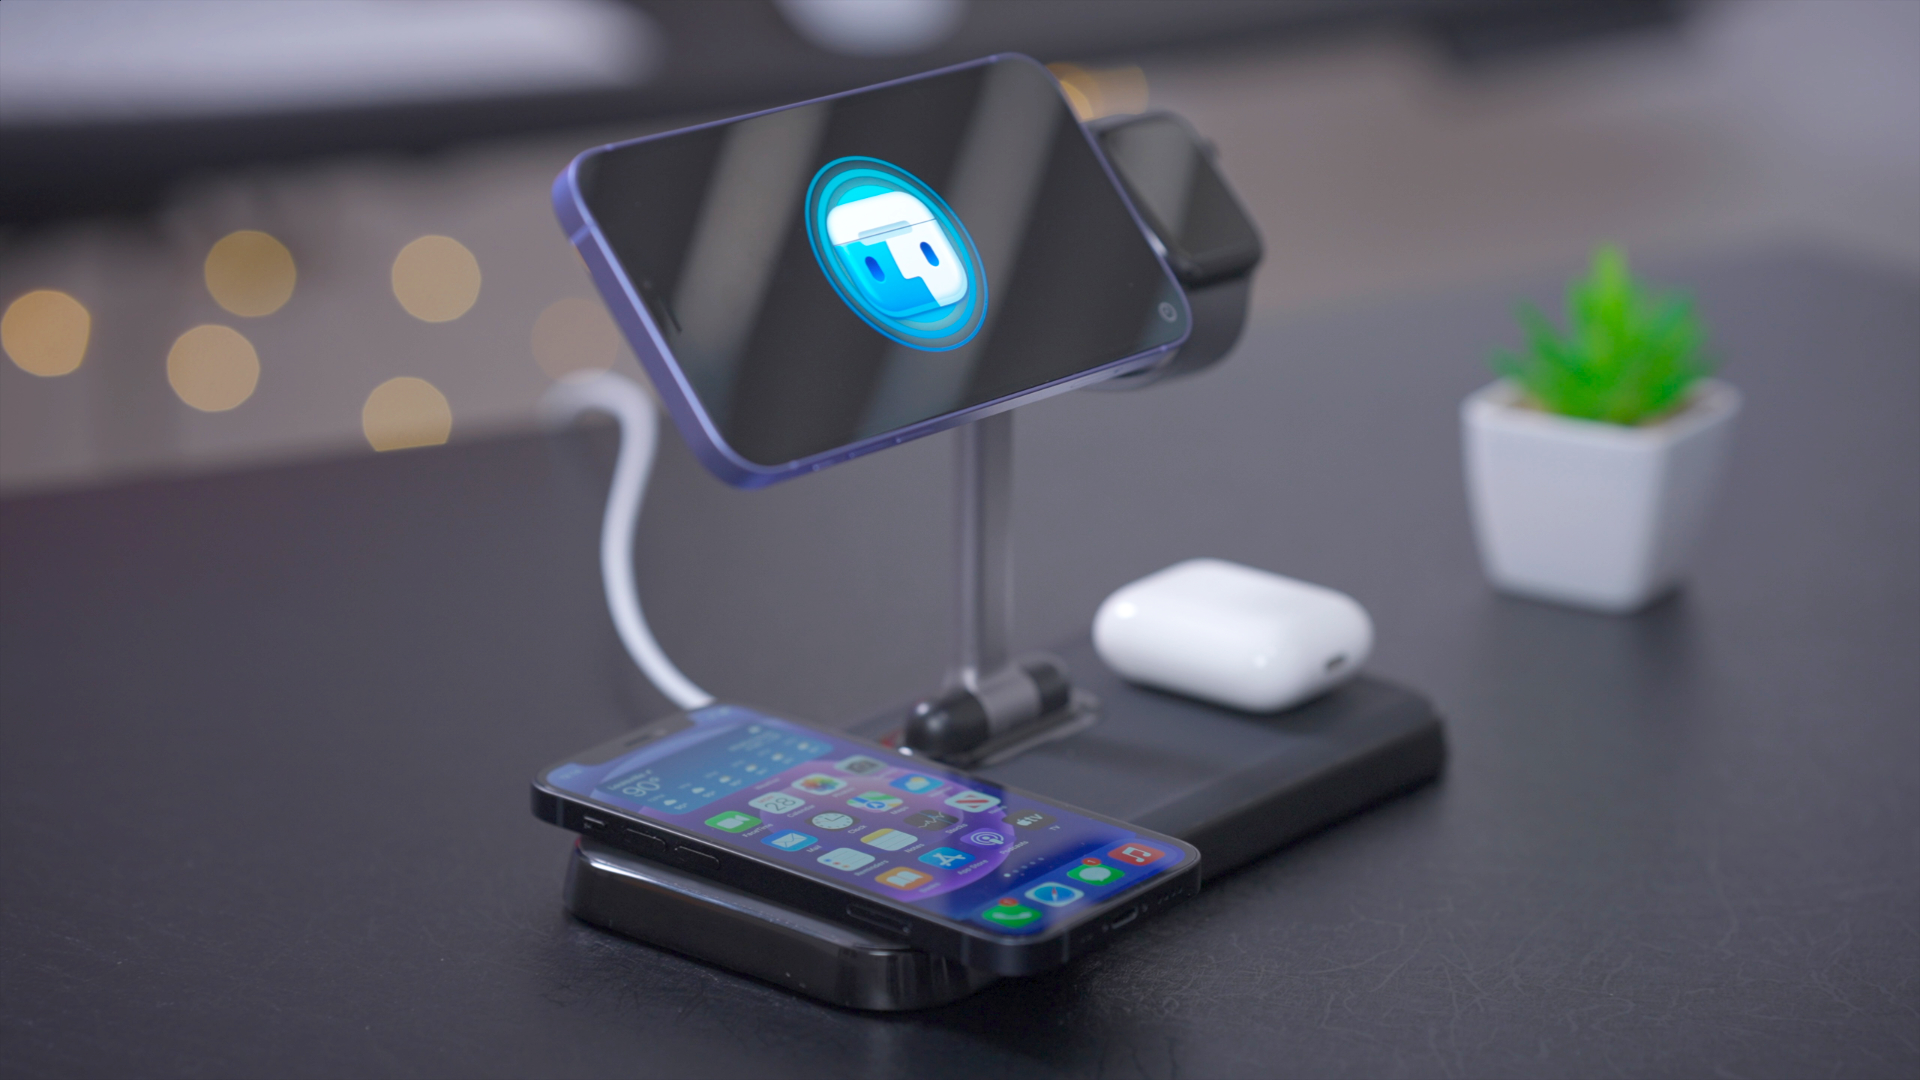 Hands-on: HyperJuice 4-in-1 Magnetic Wireless Charger Stand - 9to5Mac